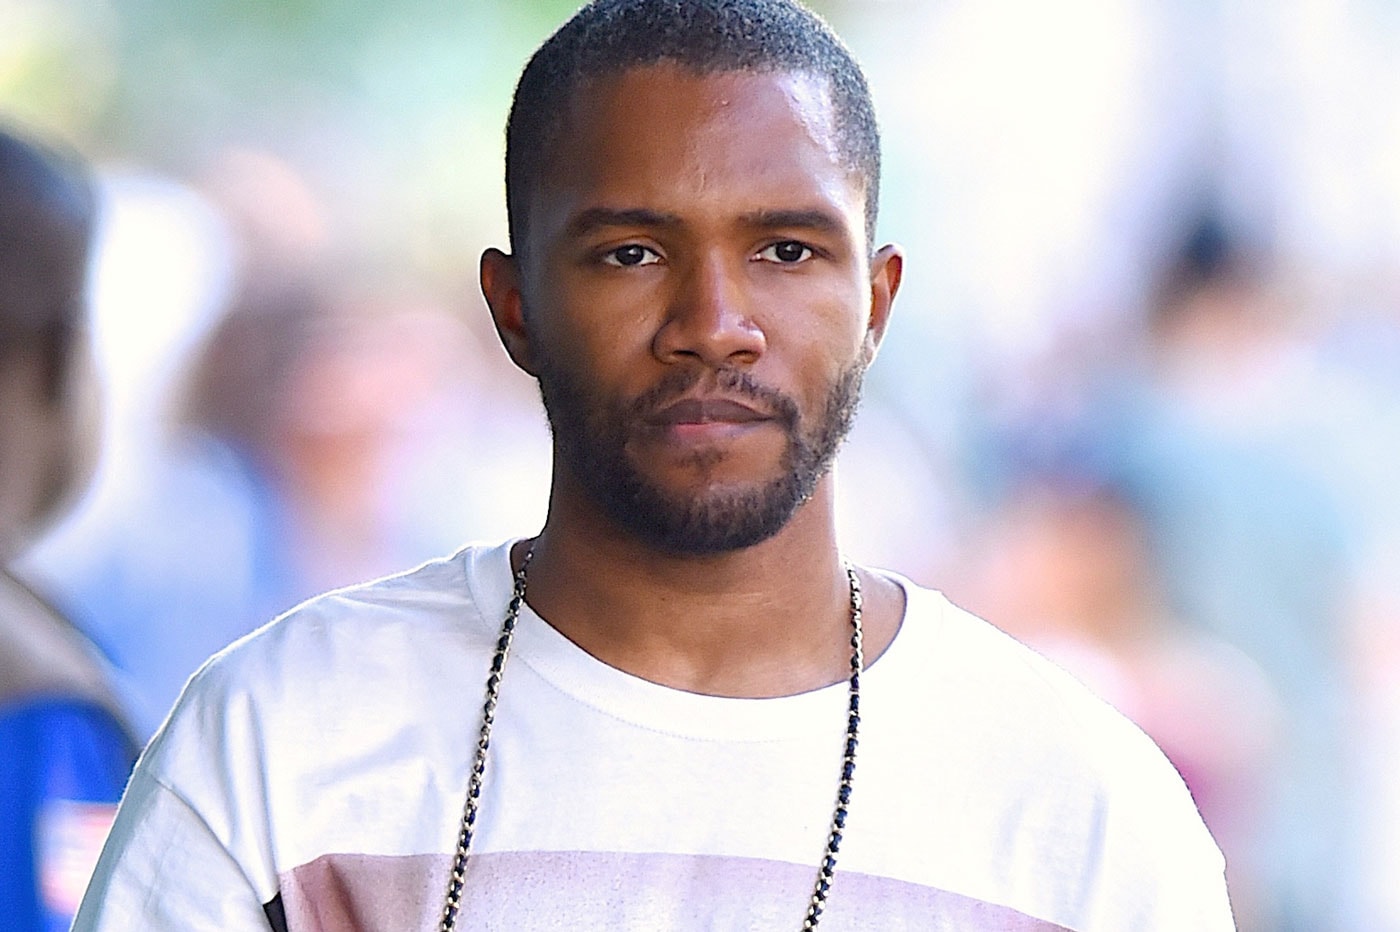 Frank Ocean 5 Songs from 'Blonde' on Billboard Hot 100 endless albums music tracks charts